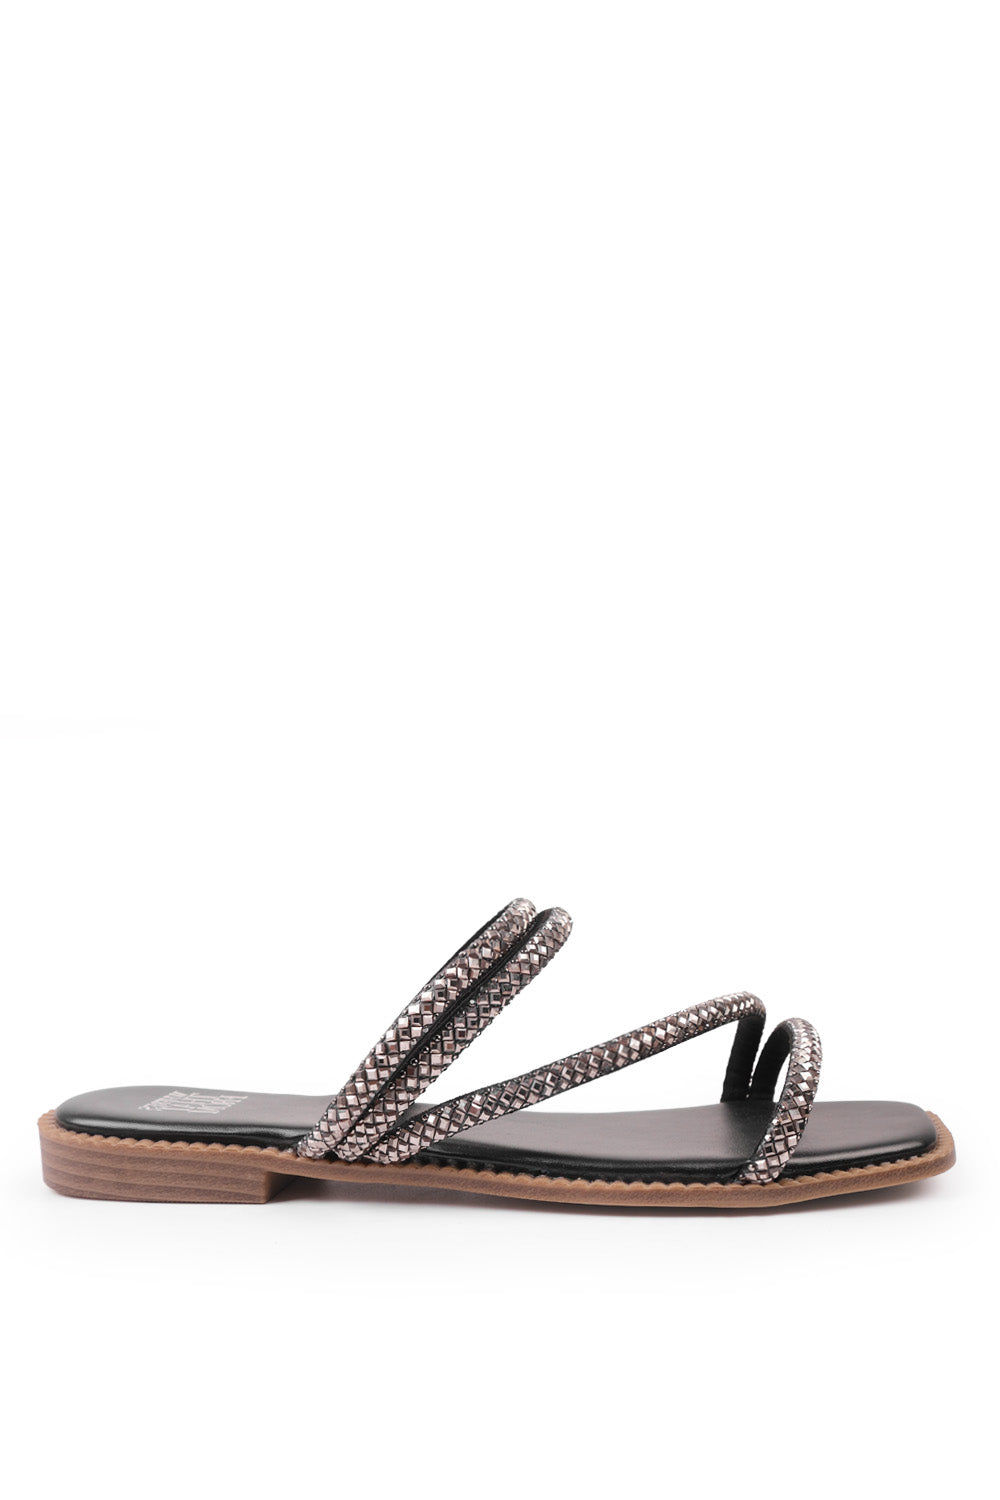 DREAM STRAPPY FLAT SLIDER SANDALS WITH DIAMANTE DETAIL IN BLACK FAUX LEATHER